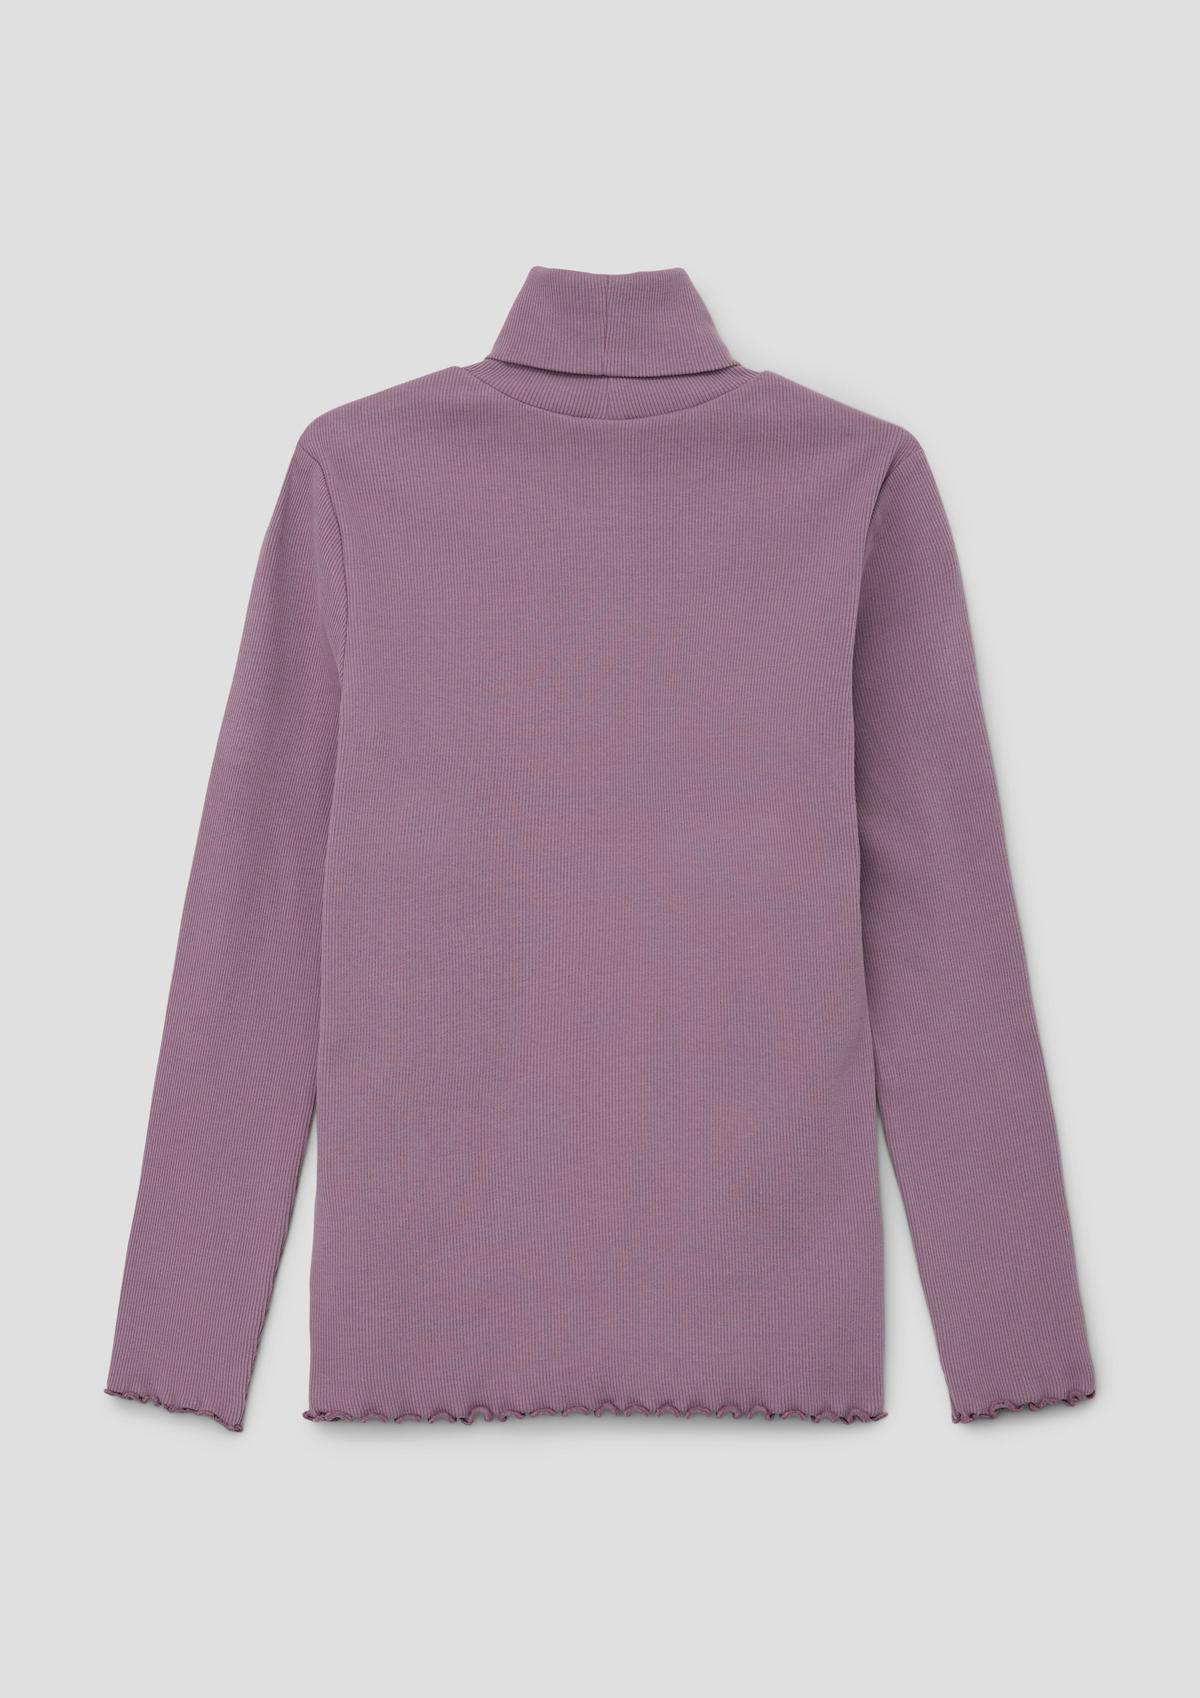 s.Oliver Polo neck jumper with a ribbed texture